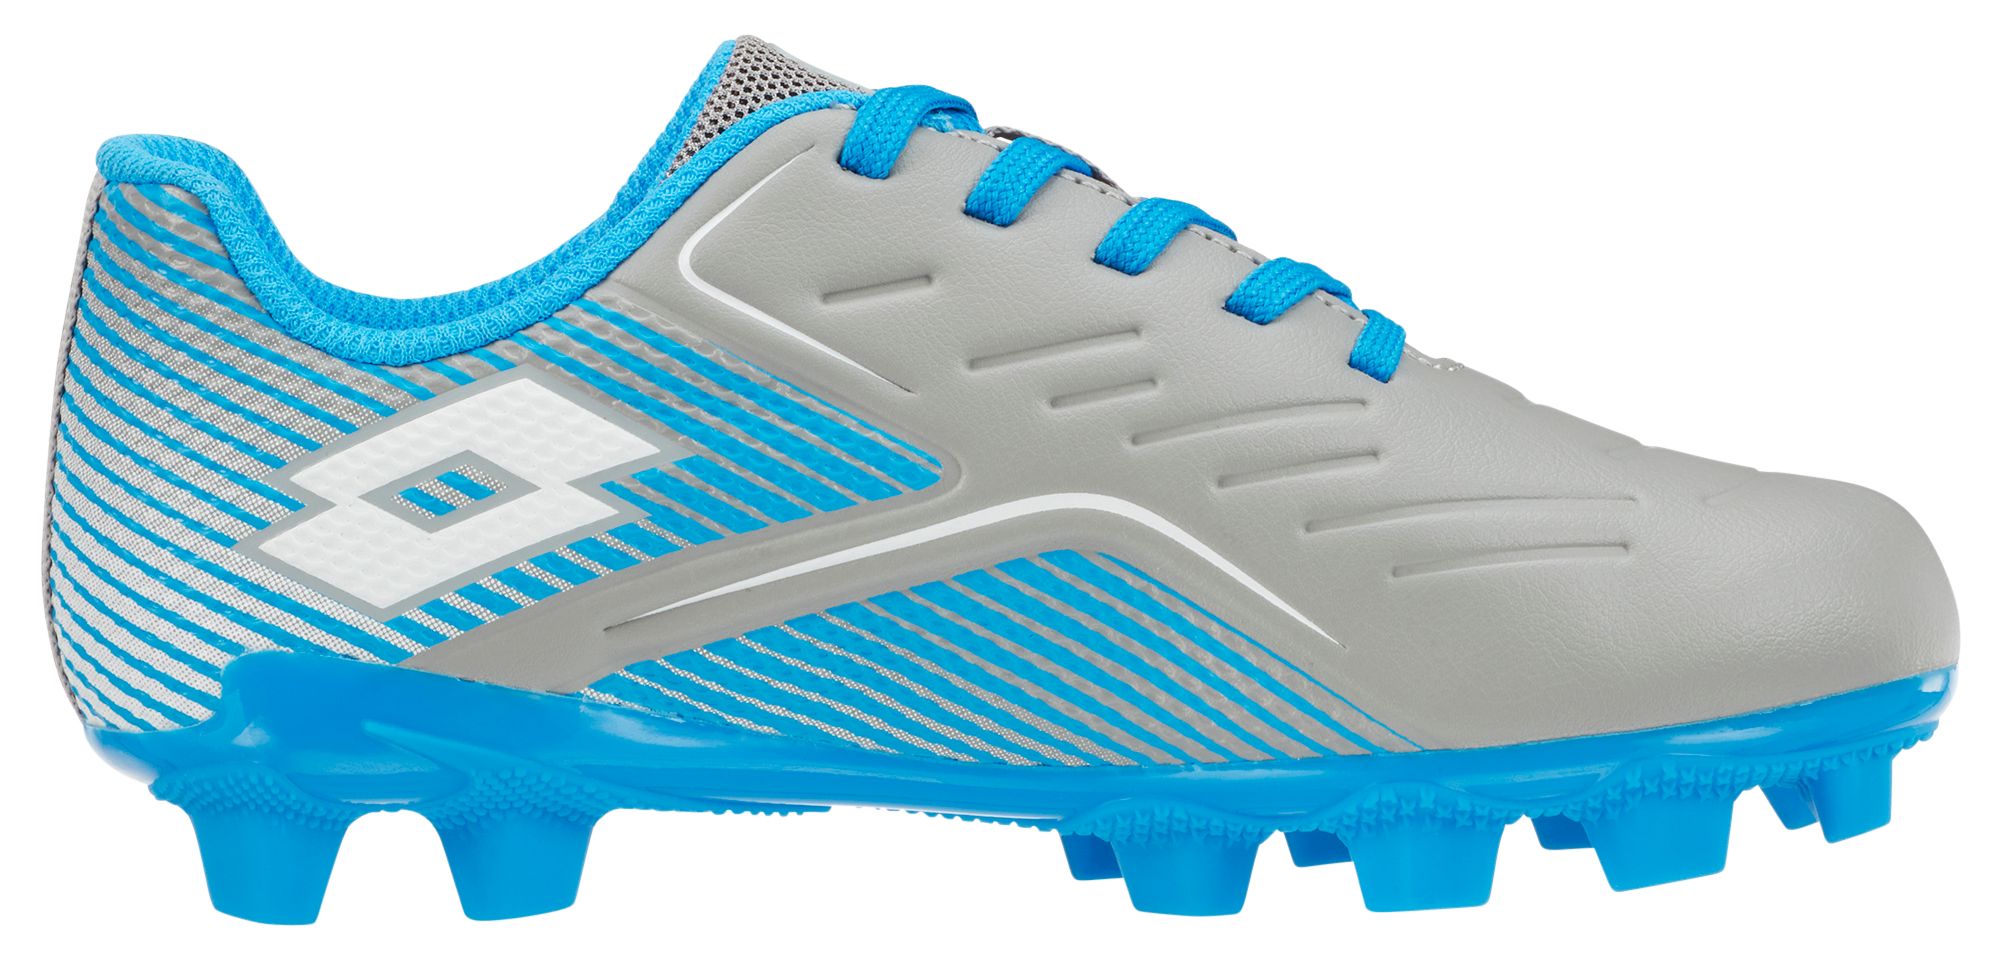 Lotto Kids' Roma 700 Soccer Cleats